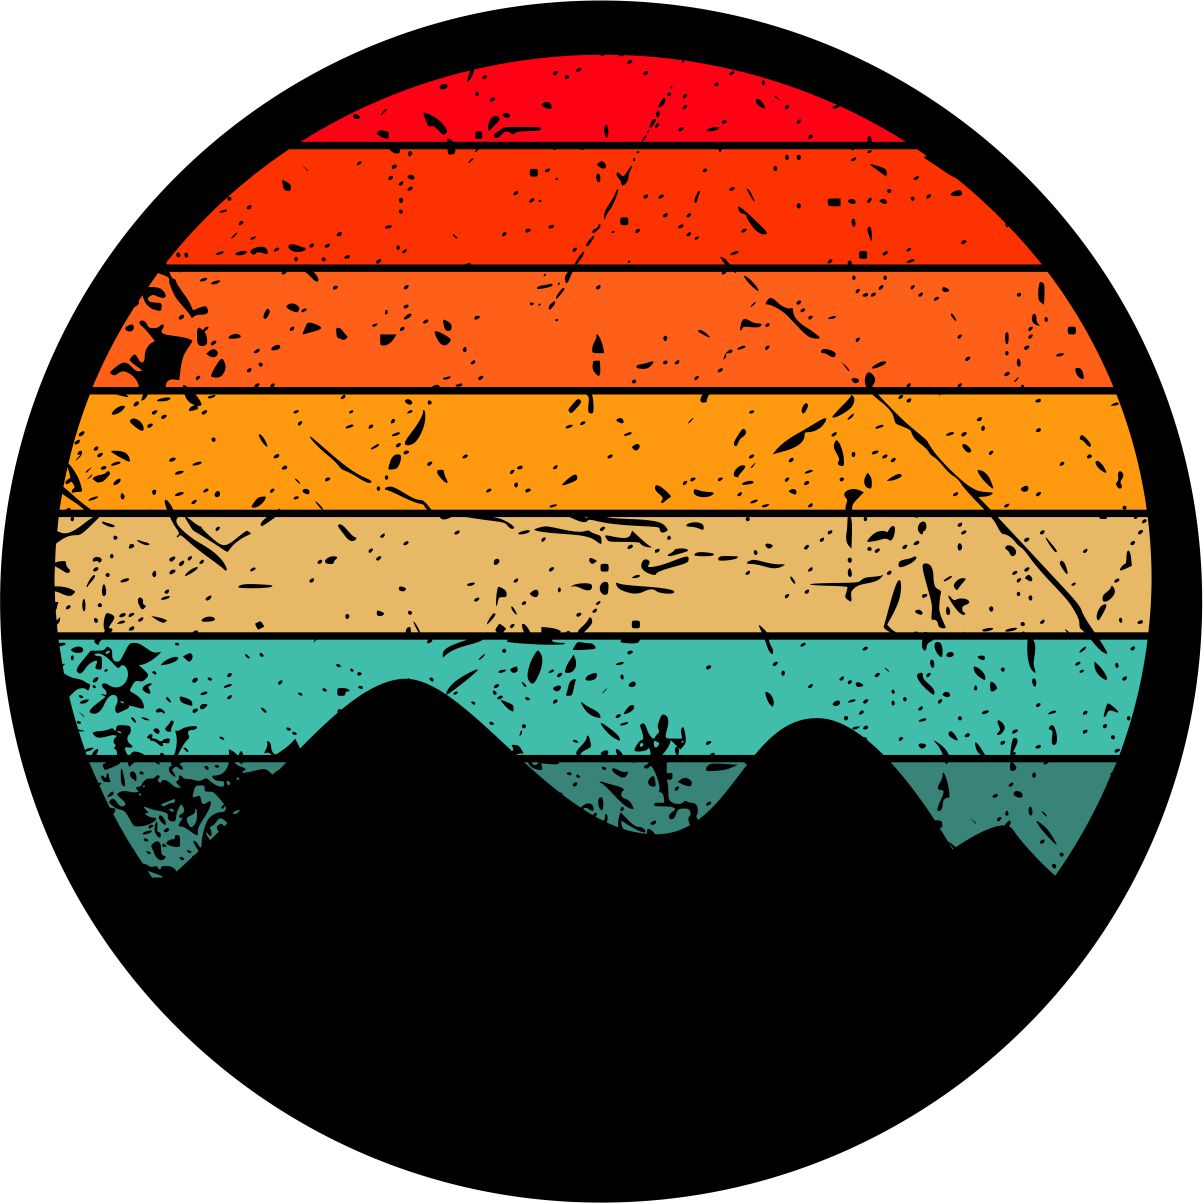 Red, orange, yellow, turquoise rustic stripes fill in the circle of this spare tire cover prototype design with the silhouette of mountains at the bottom.